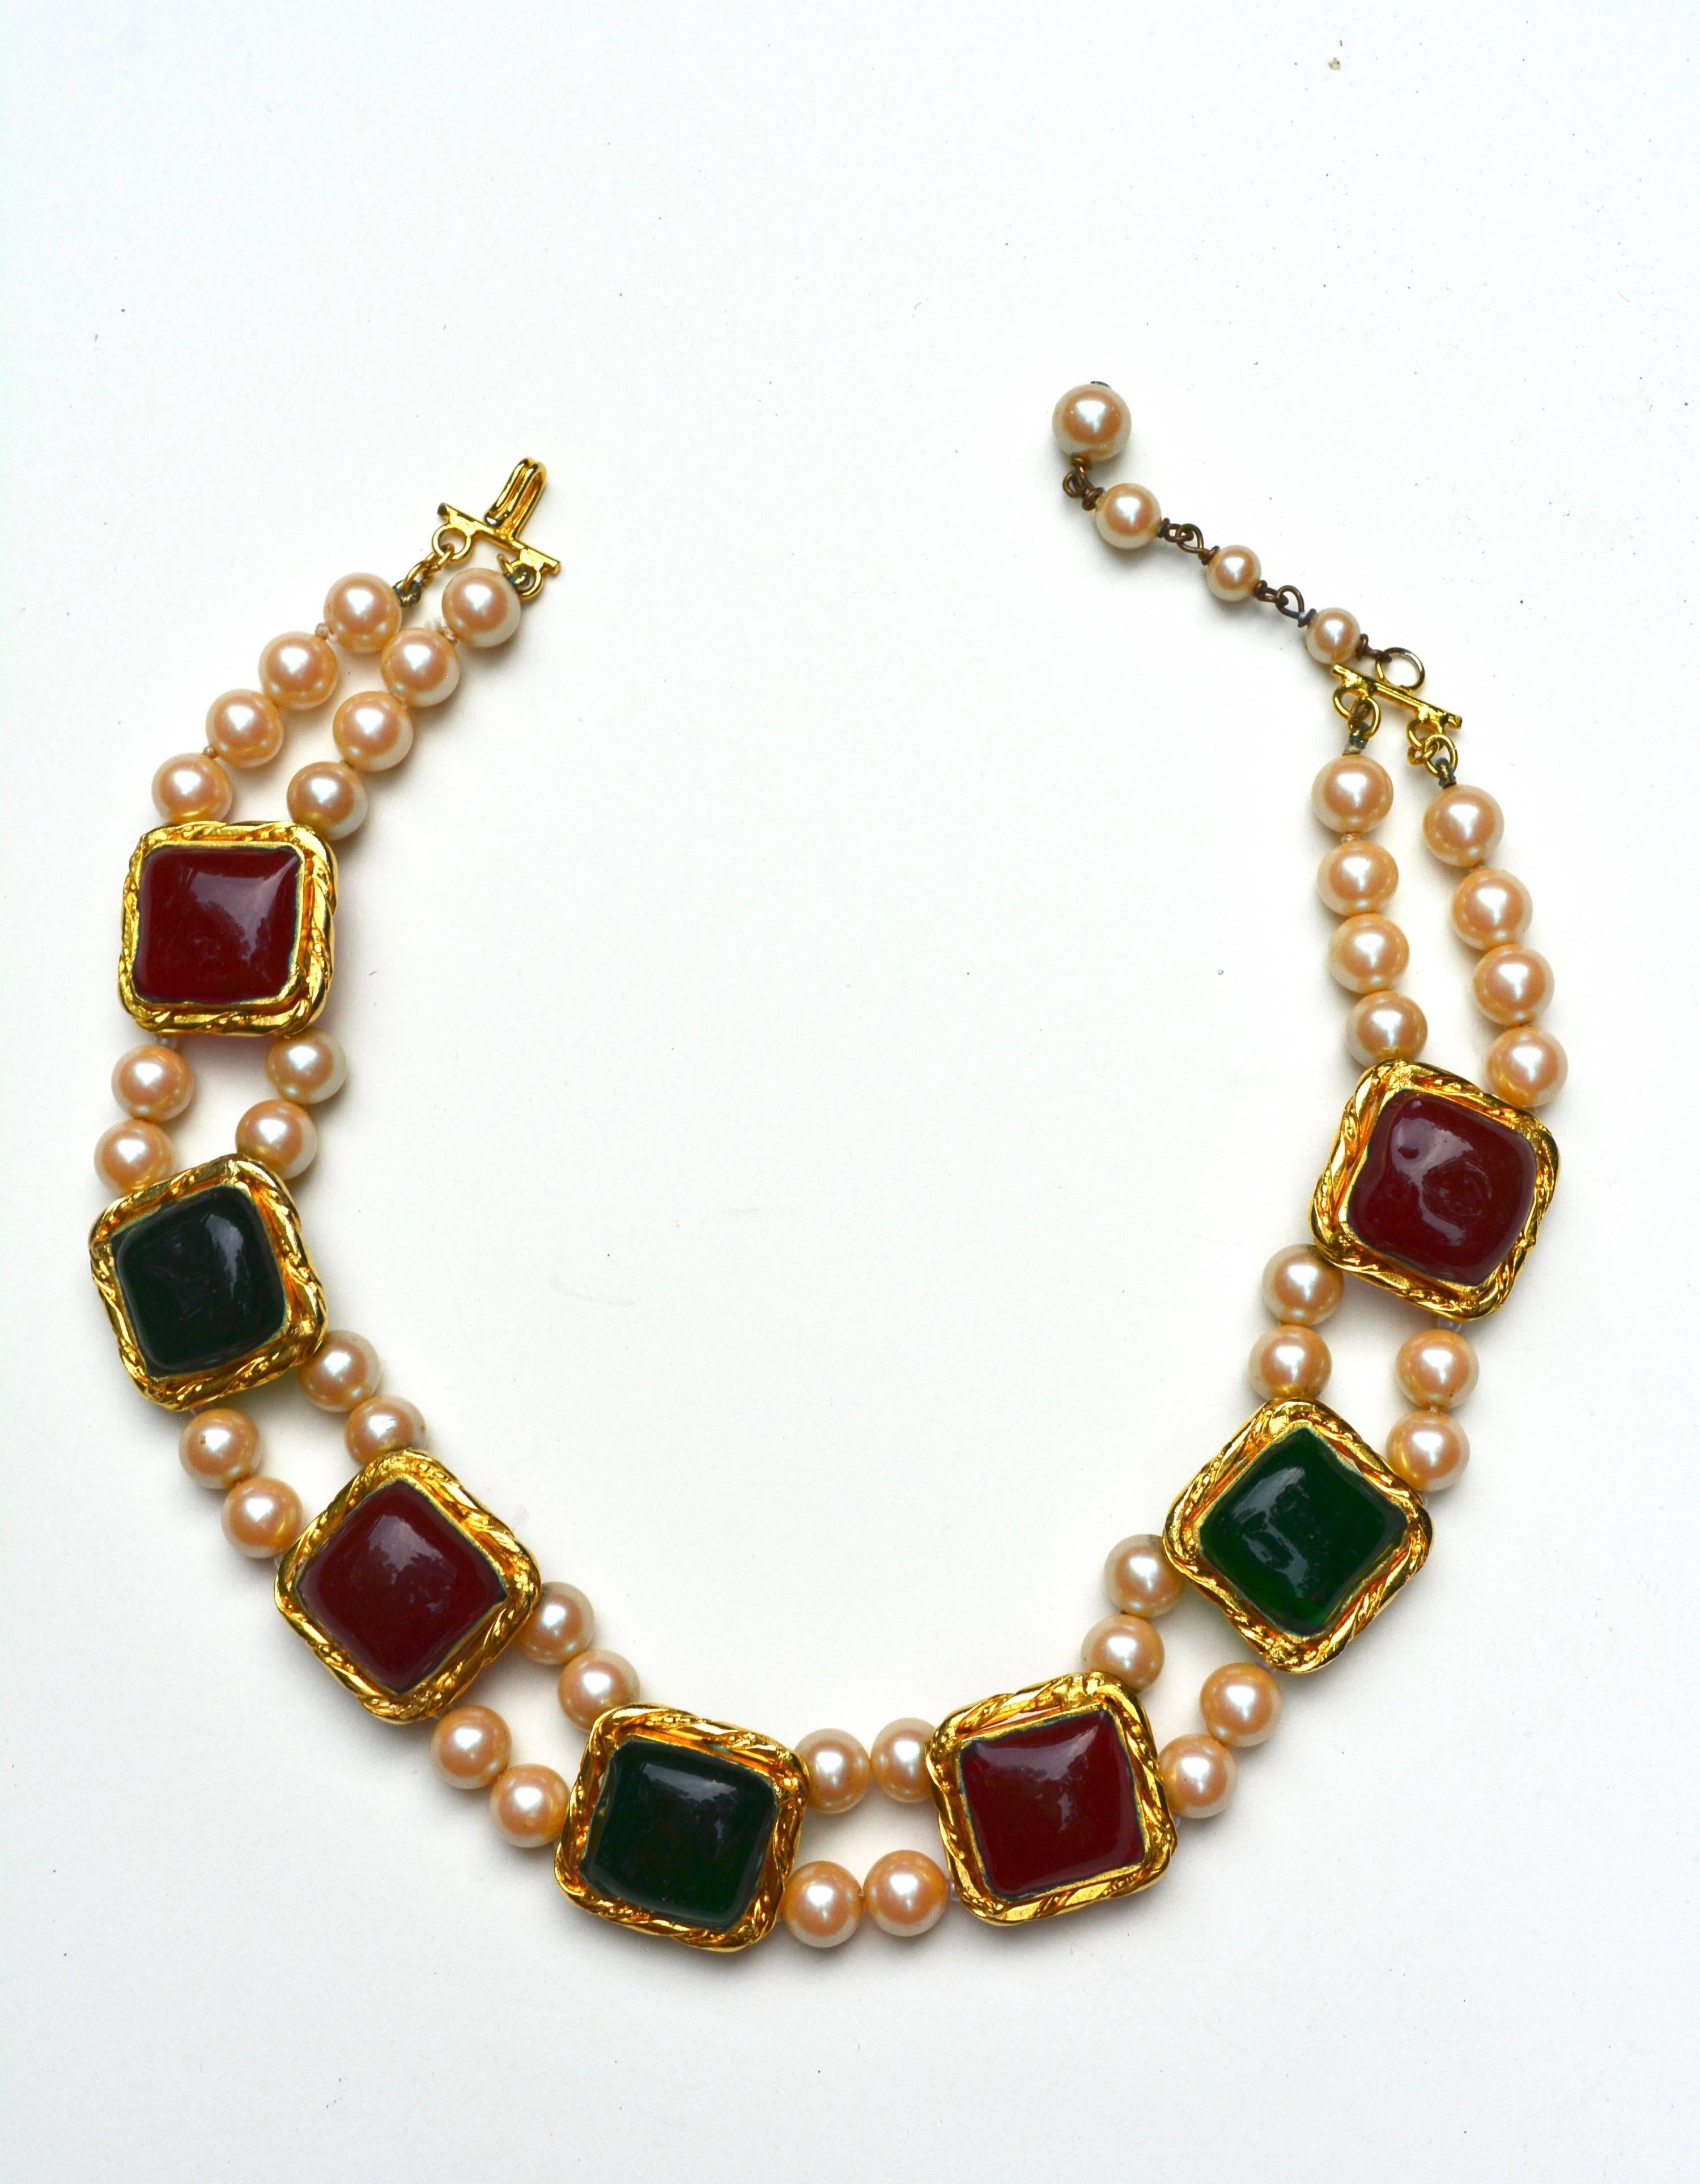 Circa 1950s-60s Gripoix and pearl necklace. Unsigned Chanel choker.  Chanel jewelry at this time was mostly unsigned. These items may have begun to be signed when Goossens started in the mid to late 50s, however most were not signed until the 1960s.